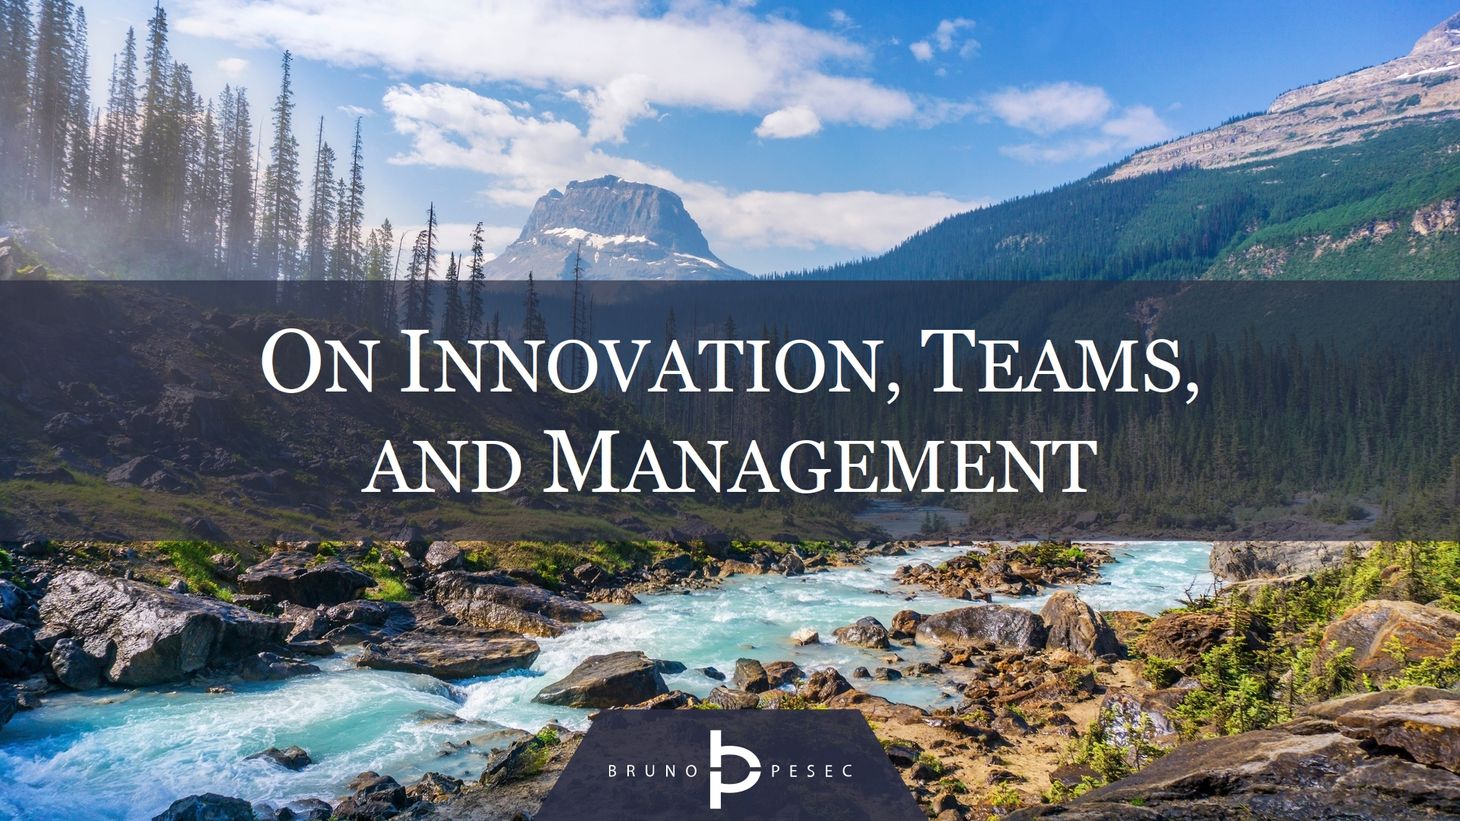 On innovation, teams, and management